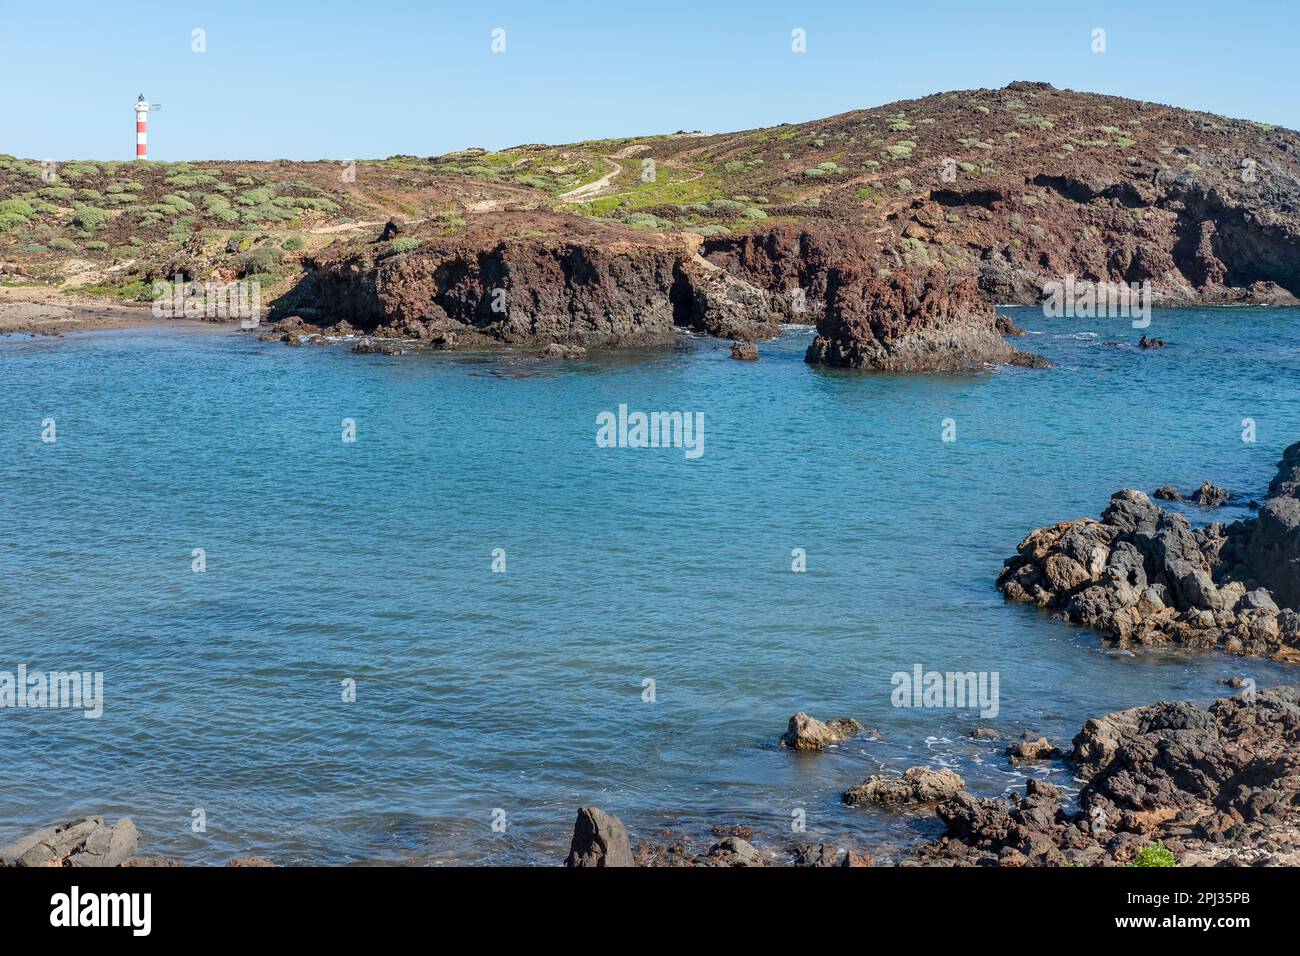 Tranquil landscape near Faro de Punta Abona, wild natural land with endemic flora, surrounded by volcanic coast, wild walking route through nature Stock Photo